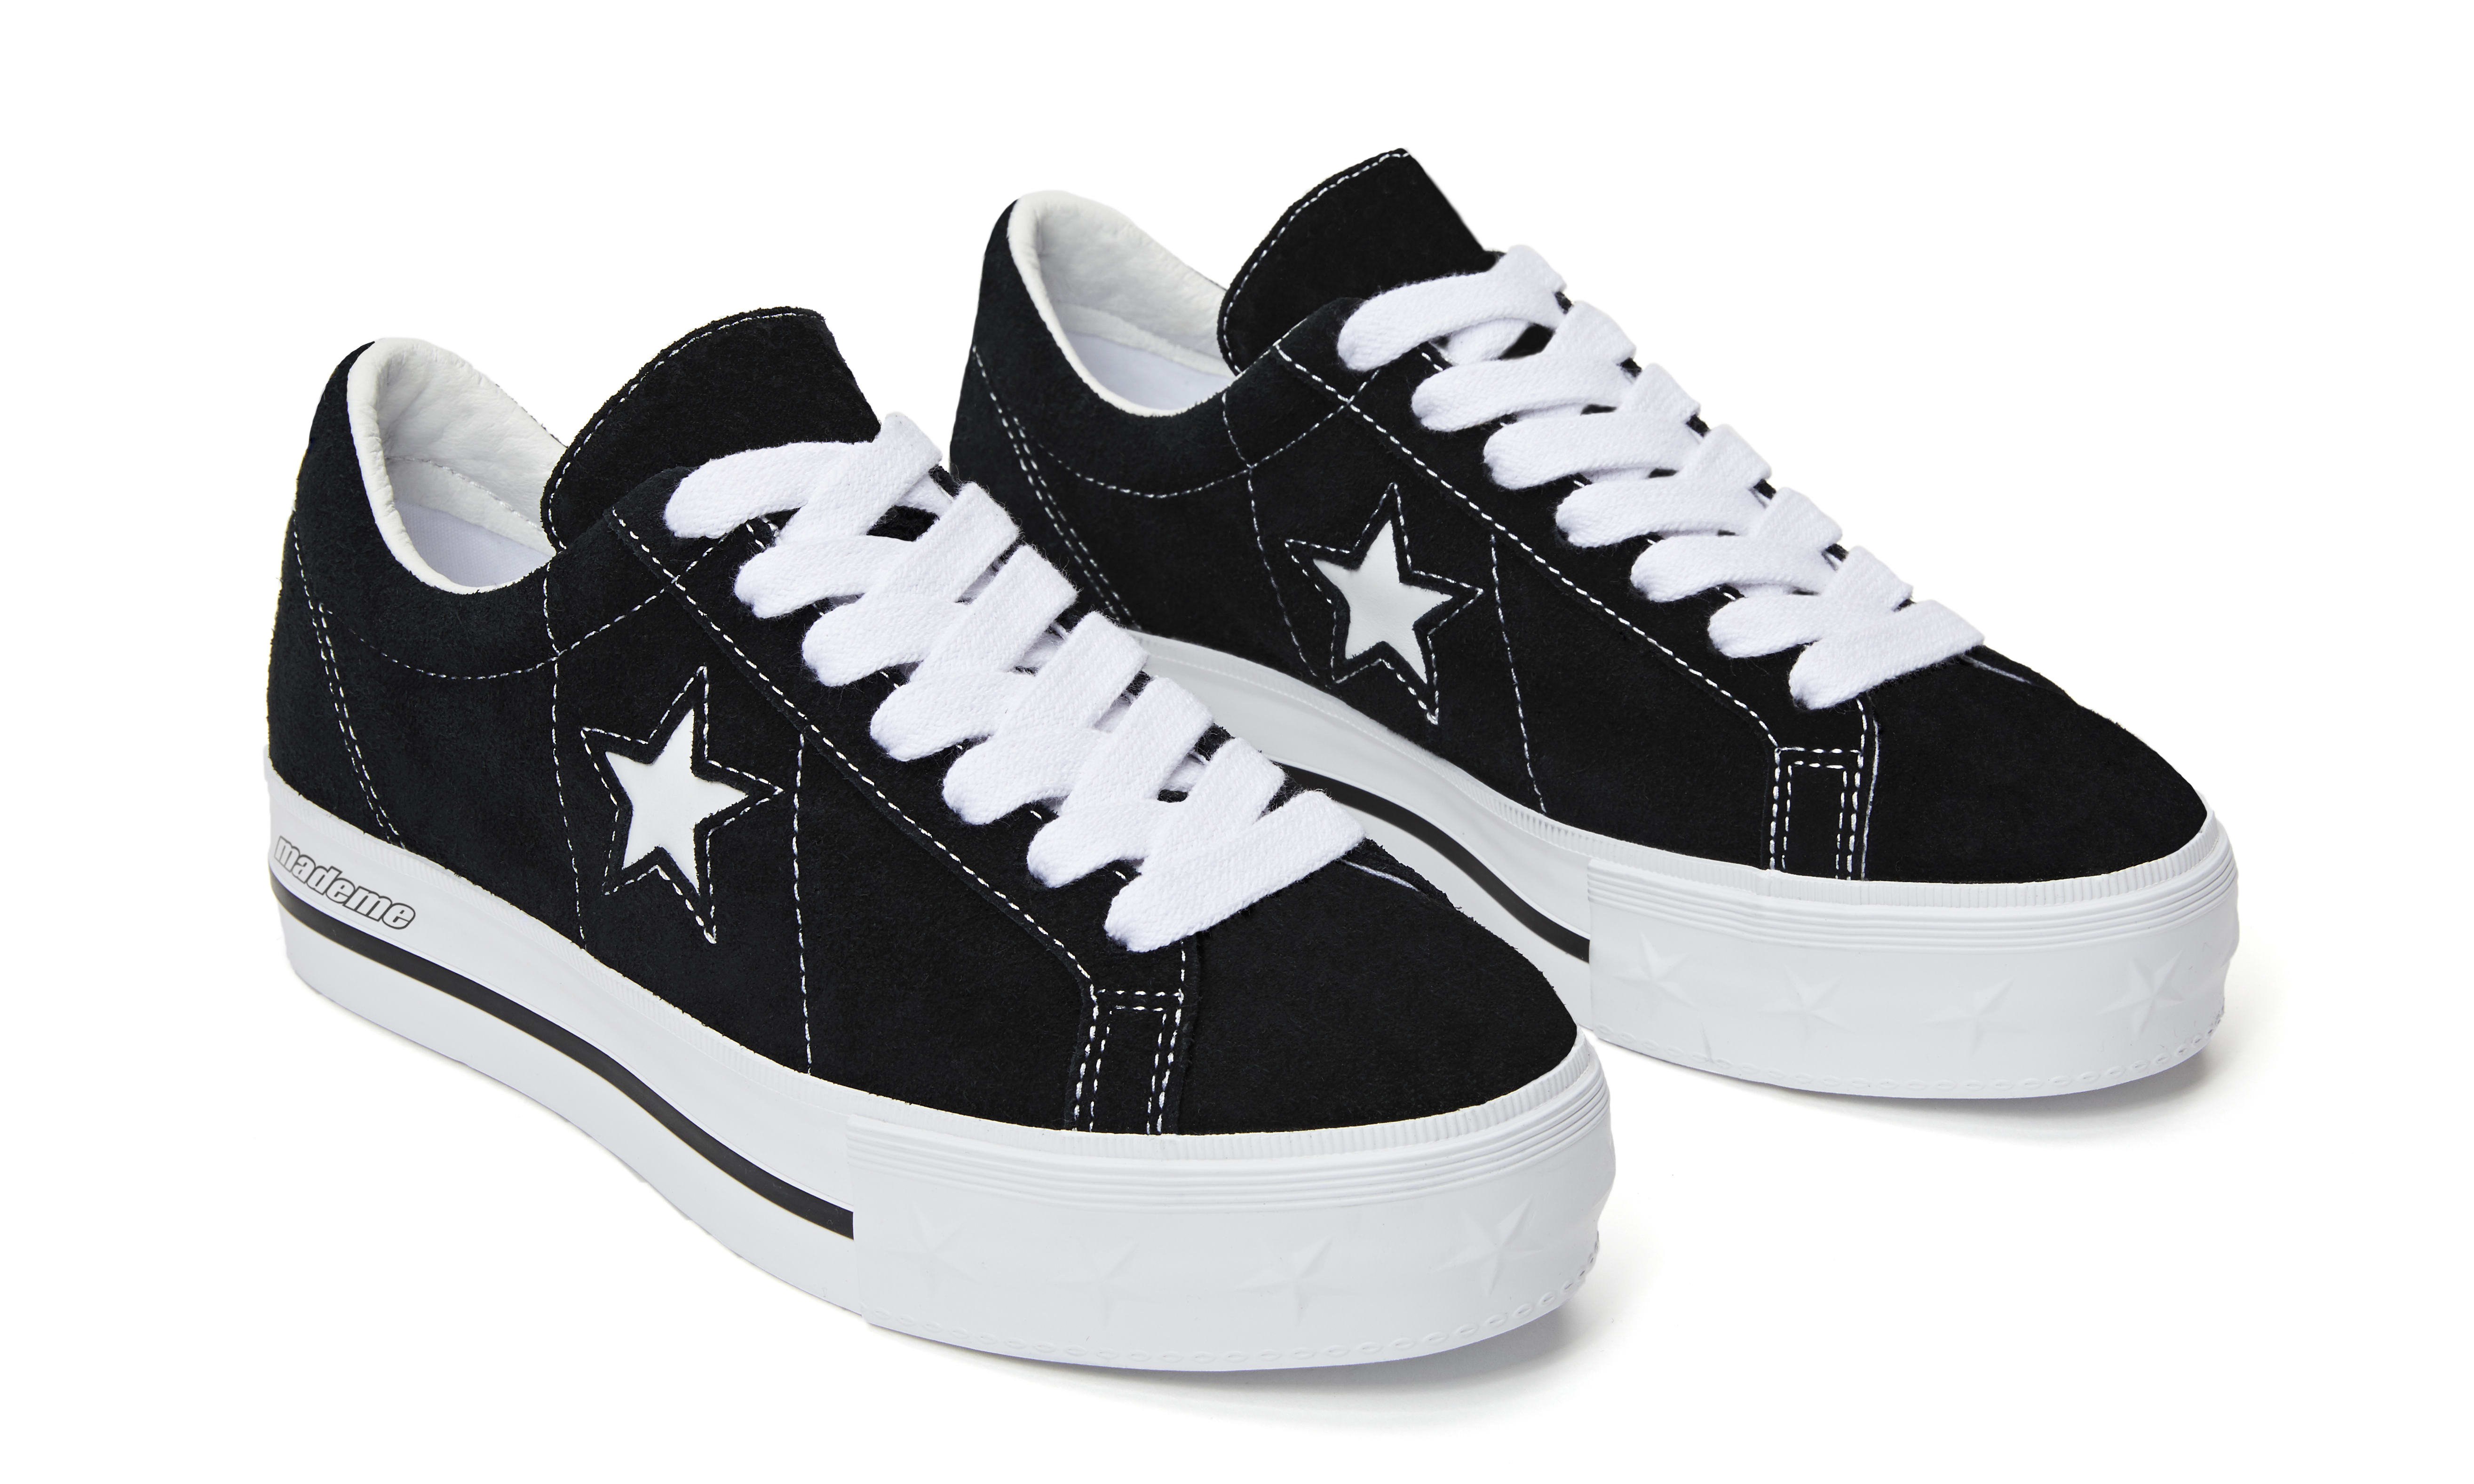 MadeMe x Converse One Star Release Date 